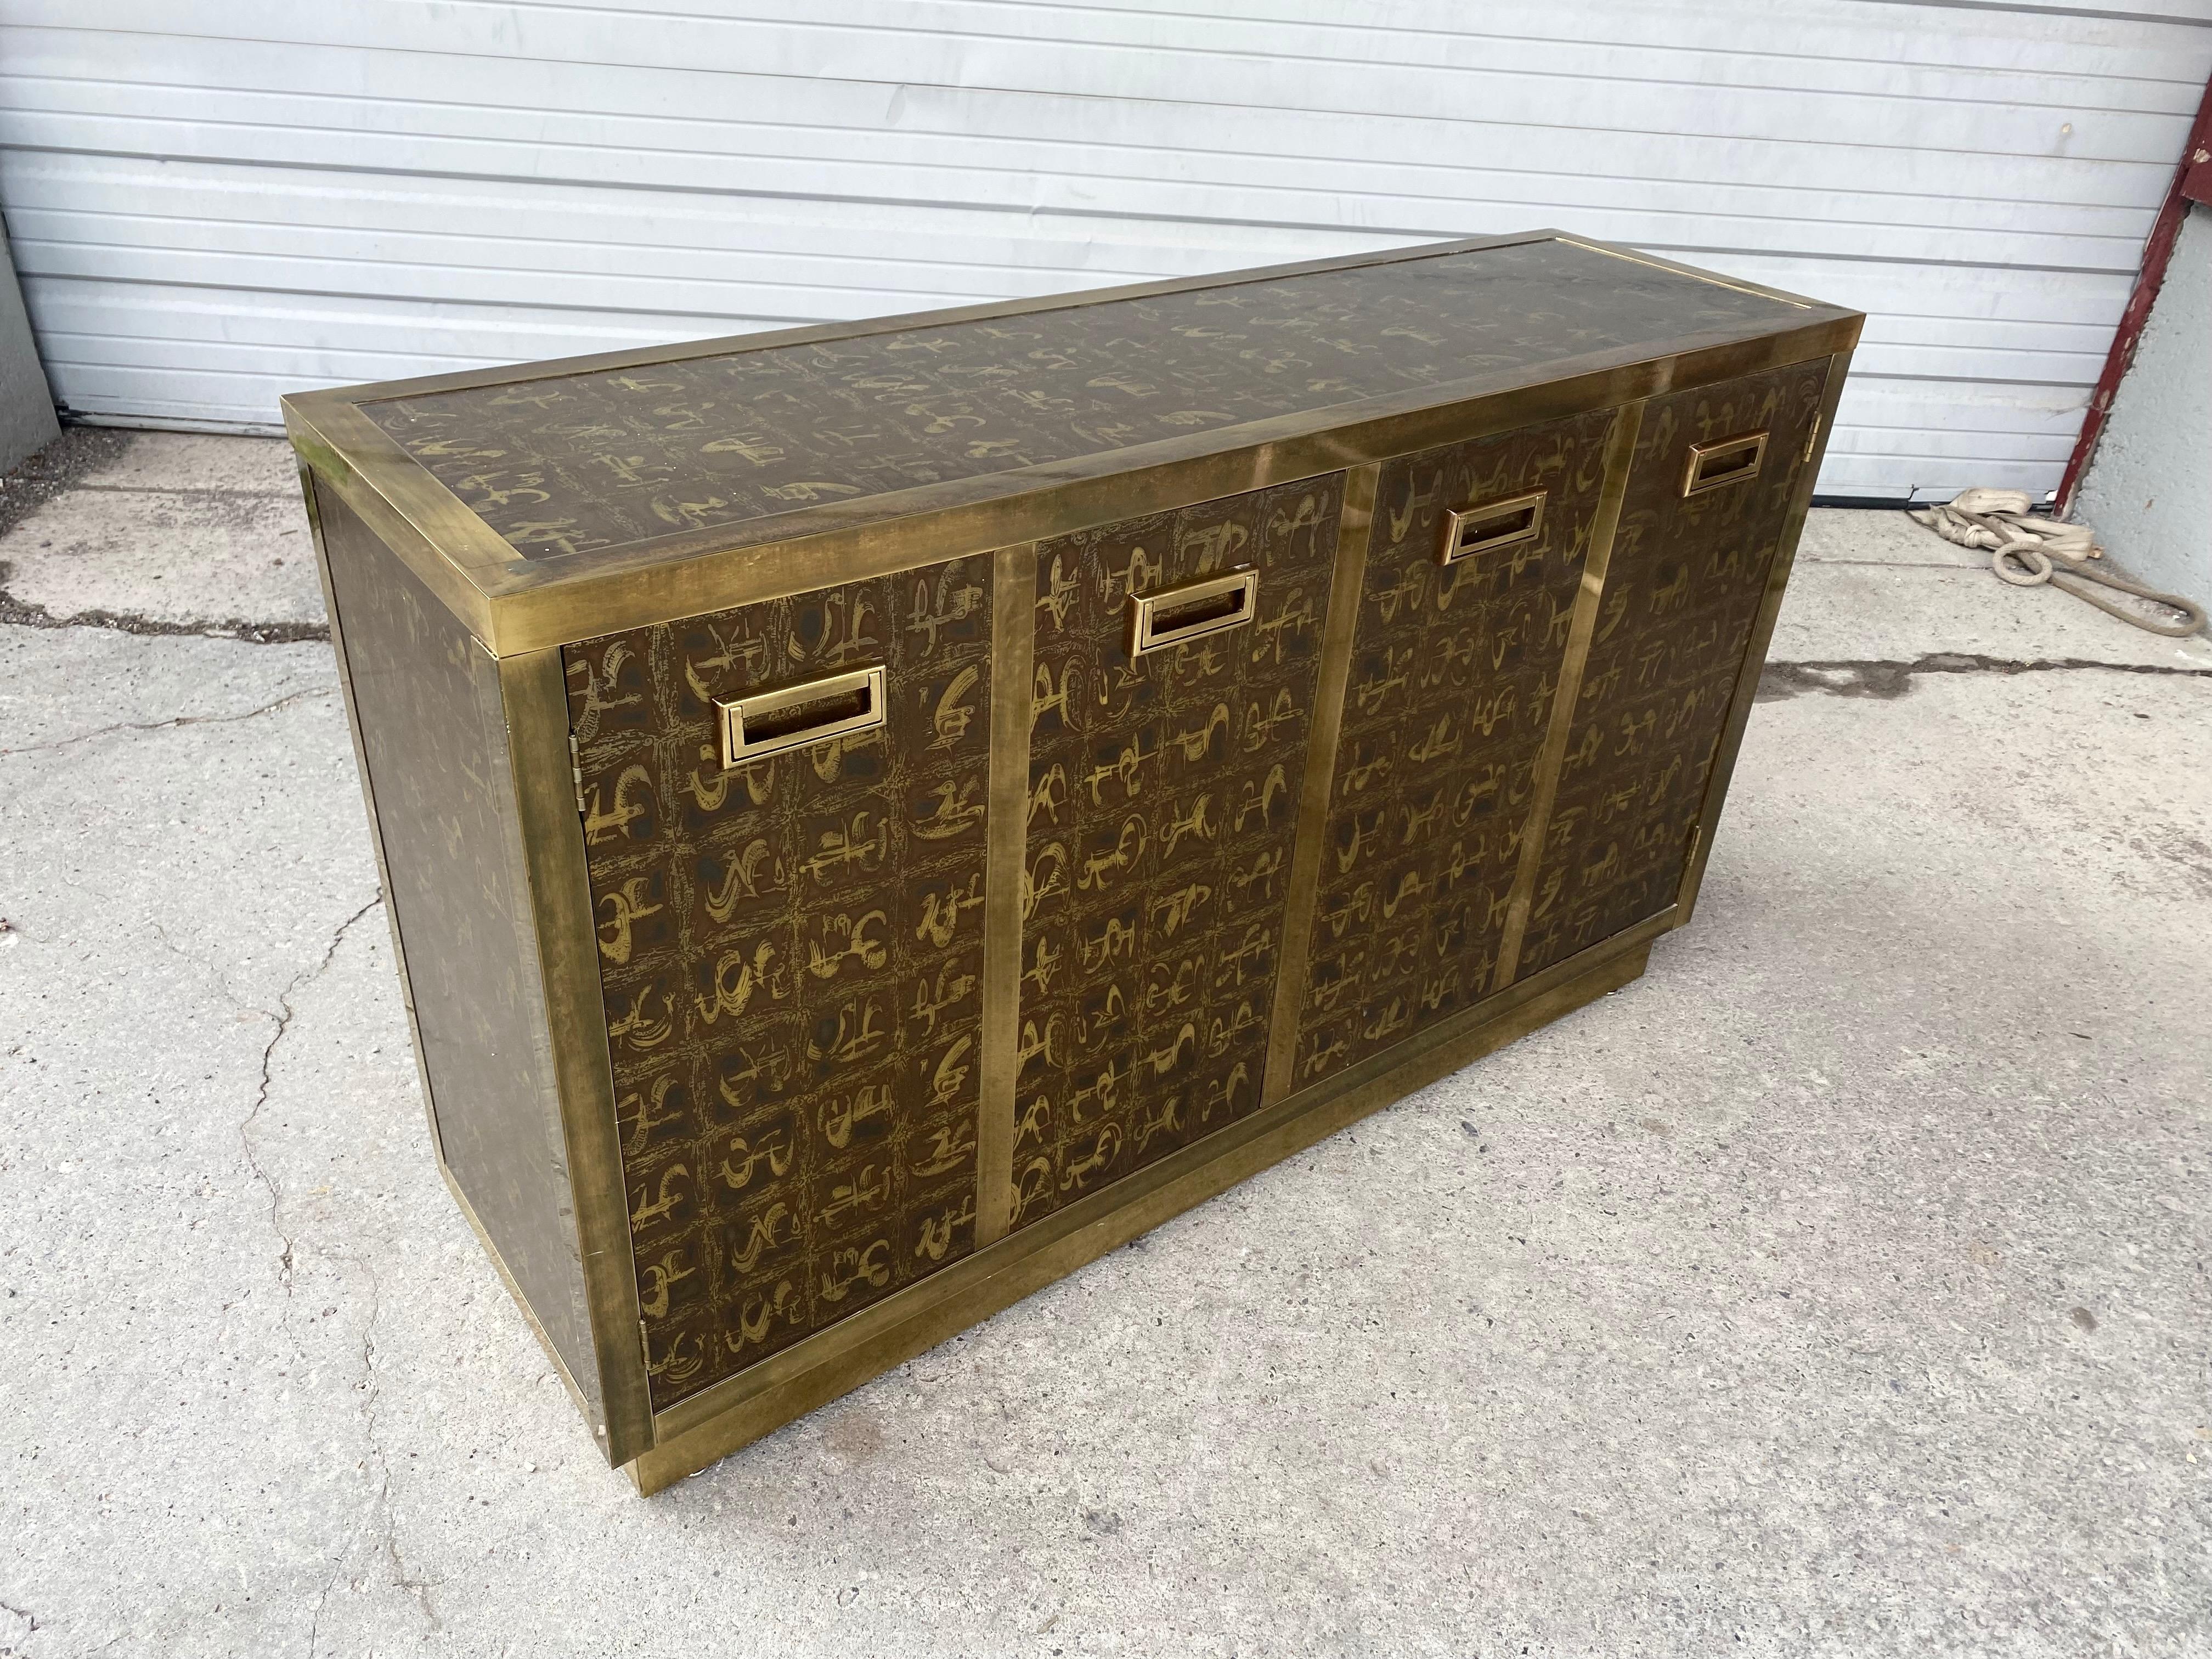 Outstanding acid etched brass cabinet by Bernard Rohne for Mastercraft, 2 door sideboard /cabinet. Dry bar, exceptional acid etched brass with brass pulls housed in a brass frame. Asian inspired motif, designed by Bernhard Rohne for Mastercraft.,